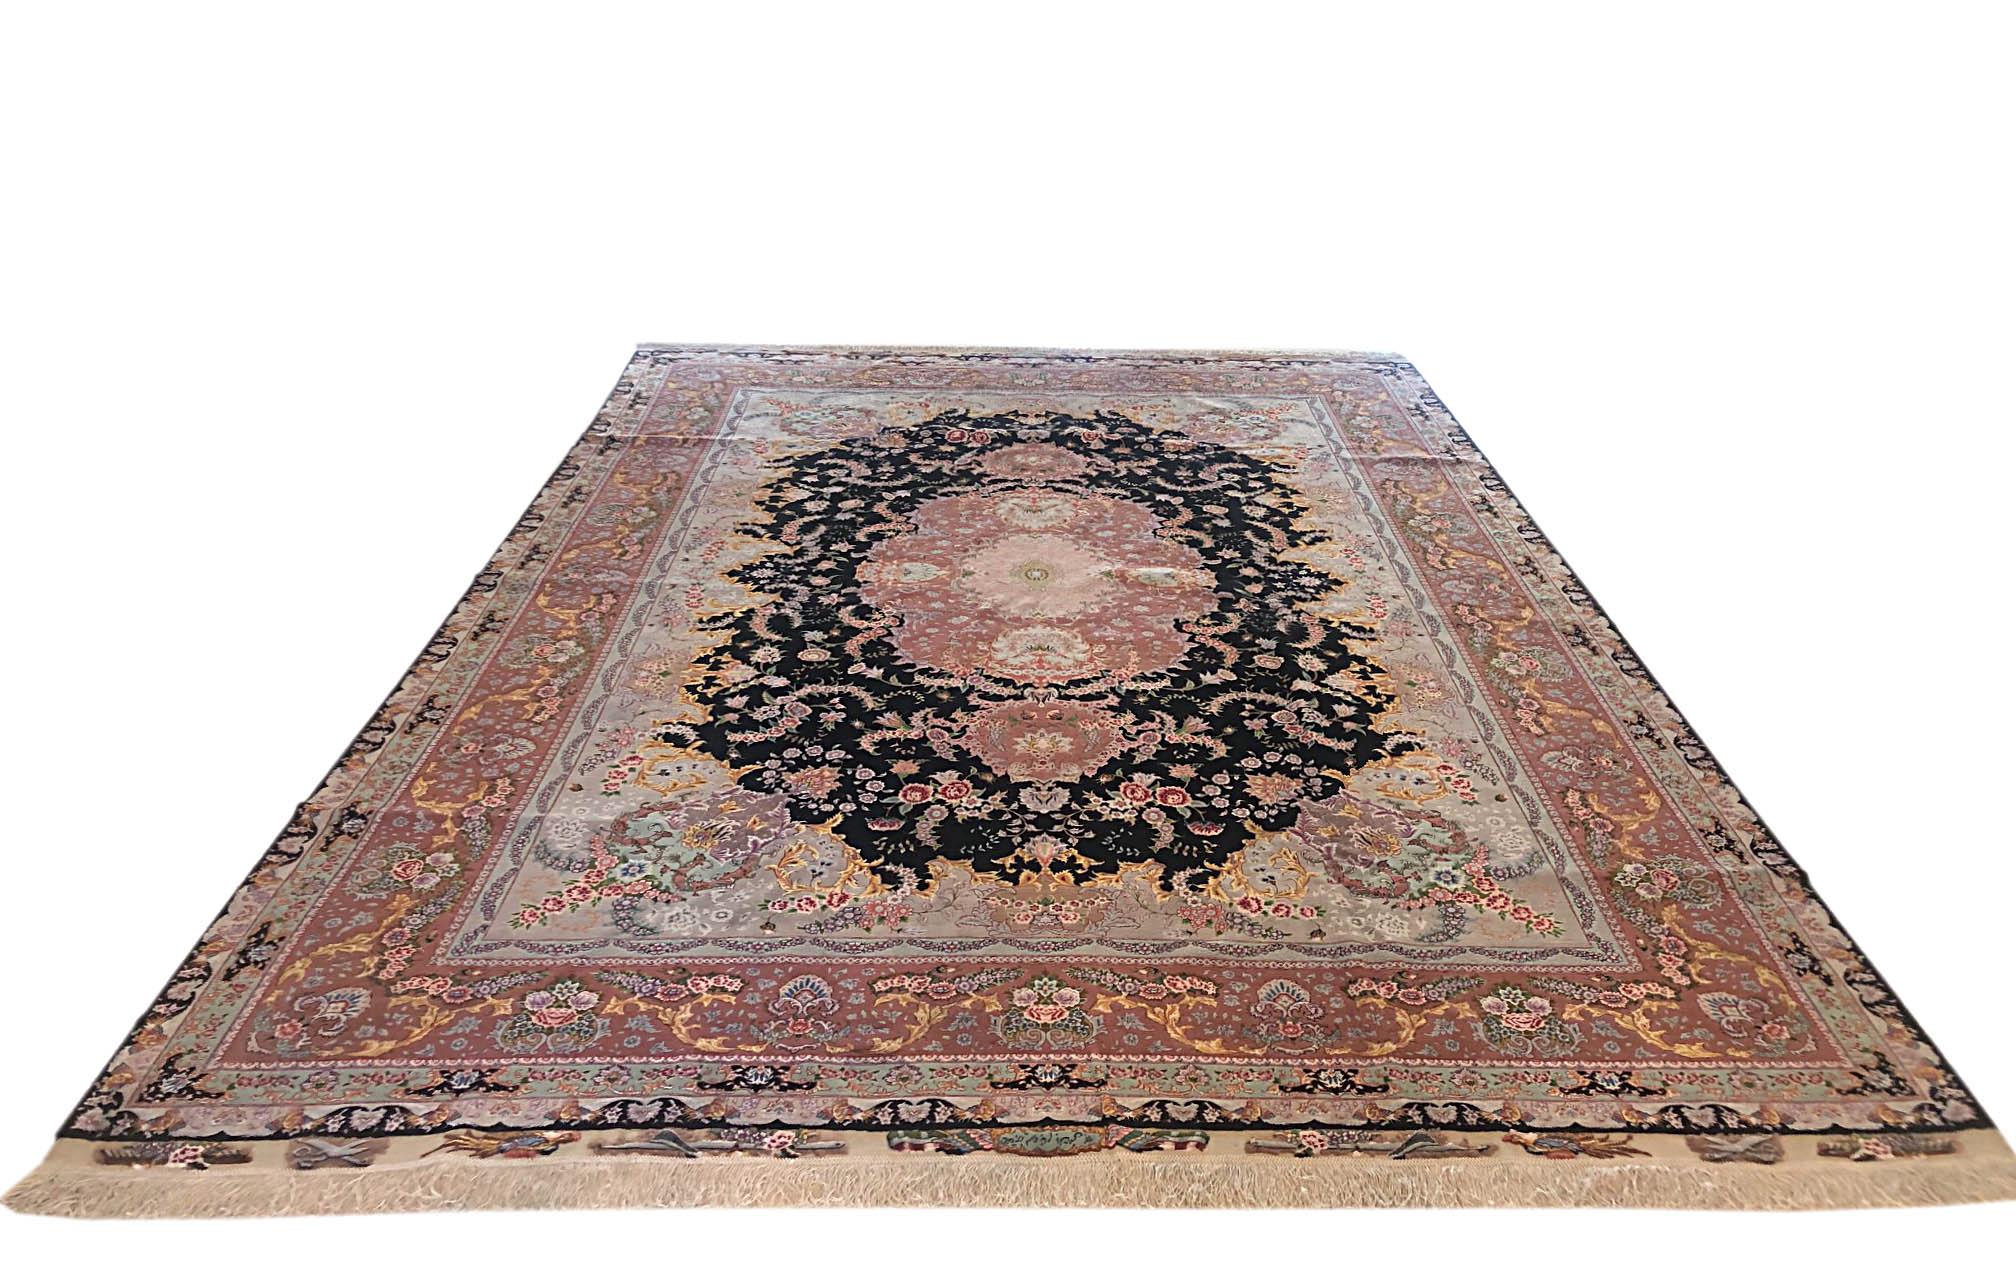 This rug is a hand knotted master piece Persian Tabriz rug with an excellent quality. This rug features a floral medallion pattern designed by famous designer in Tabriz called Benam. The pile is wool and silk with silk foundation. The size is 8 feet